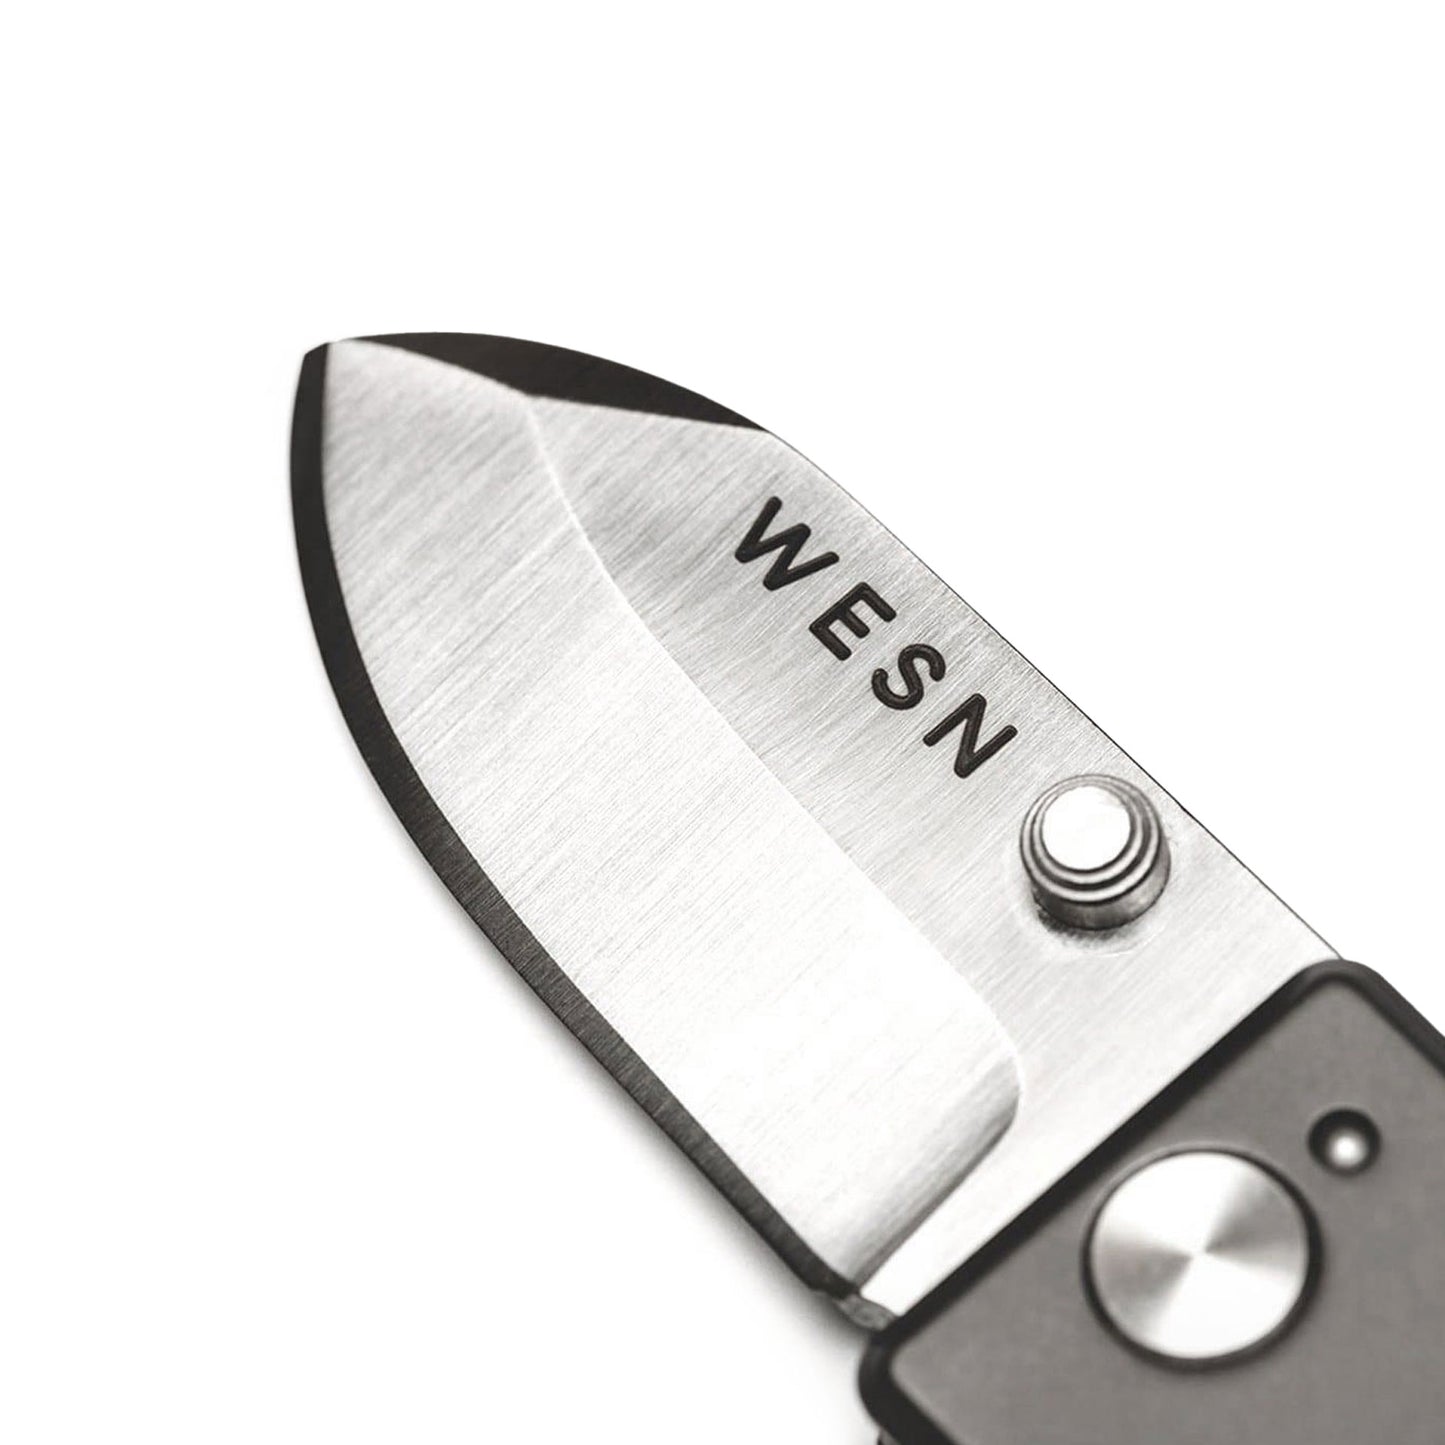 Wesn Microblade 2.0 Knife